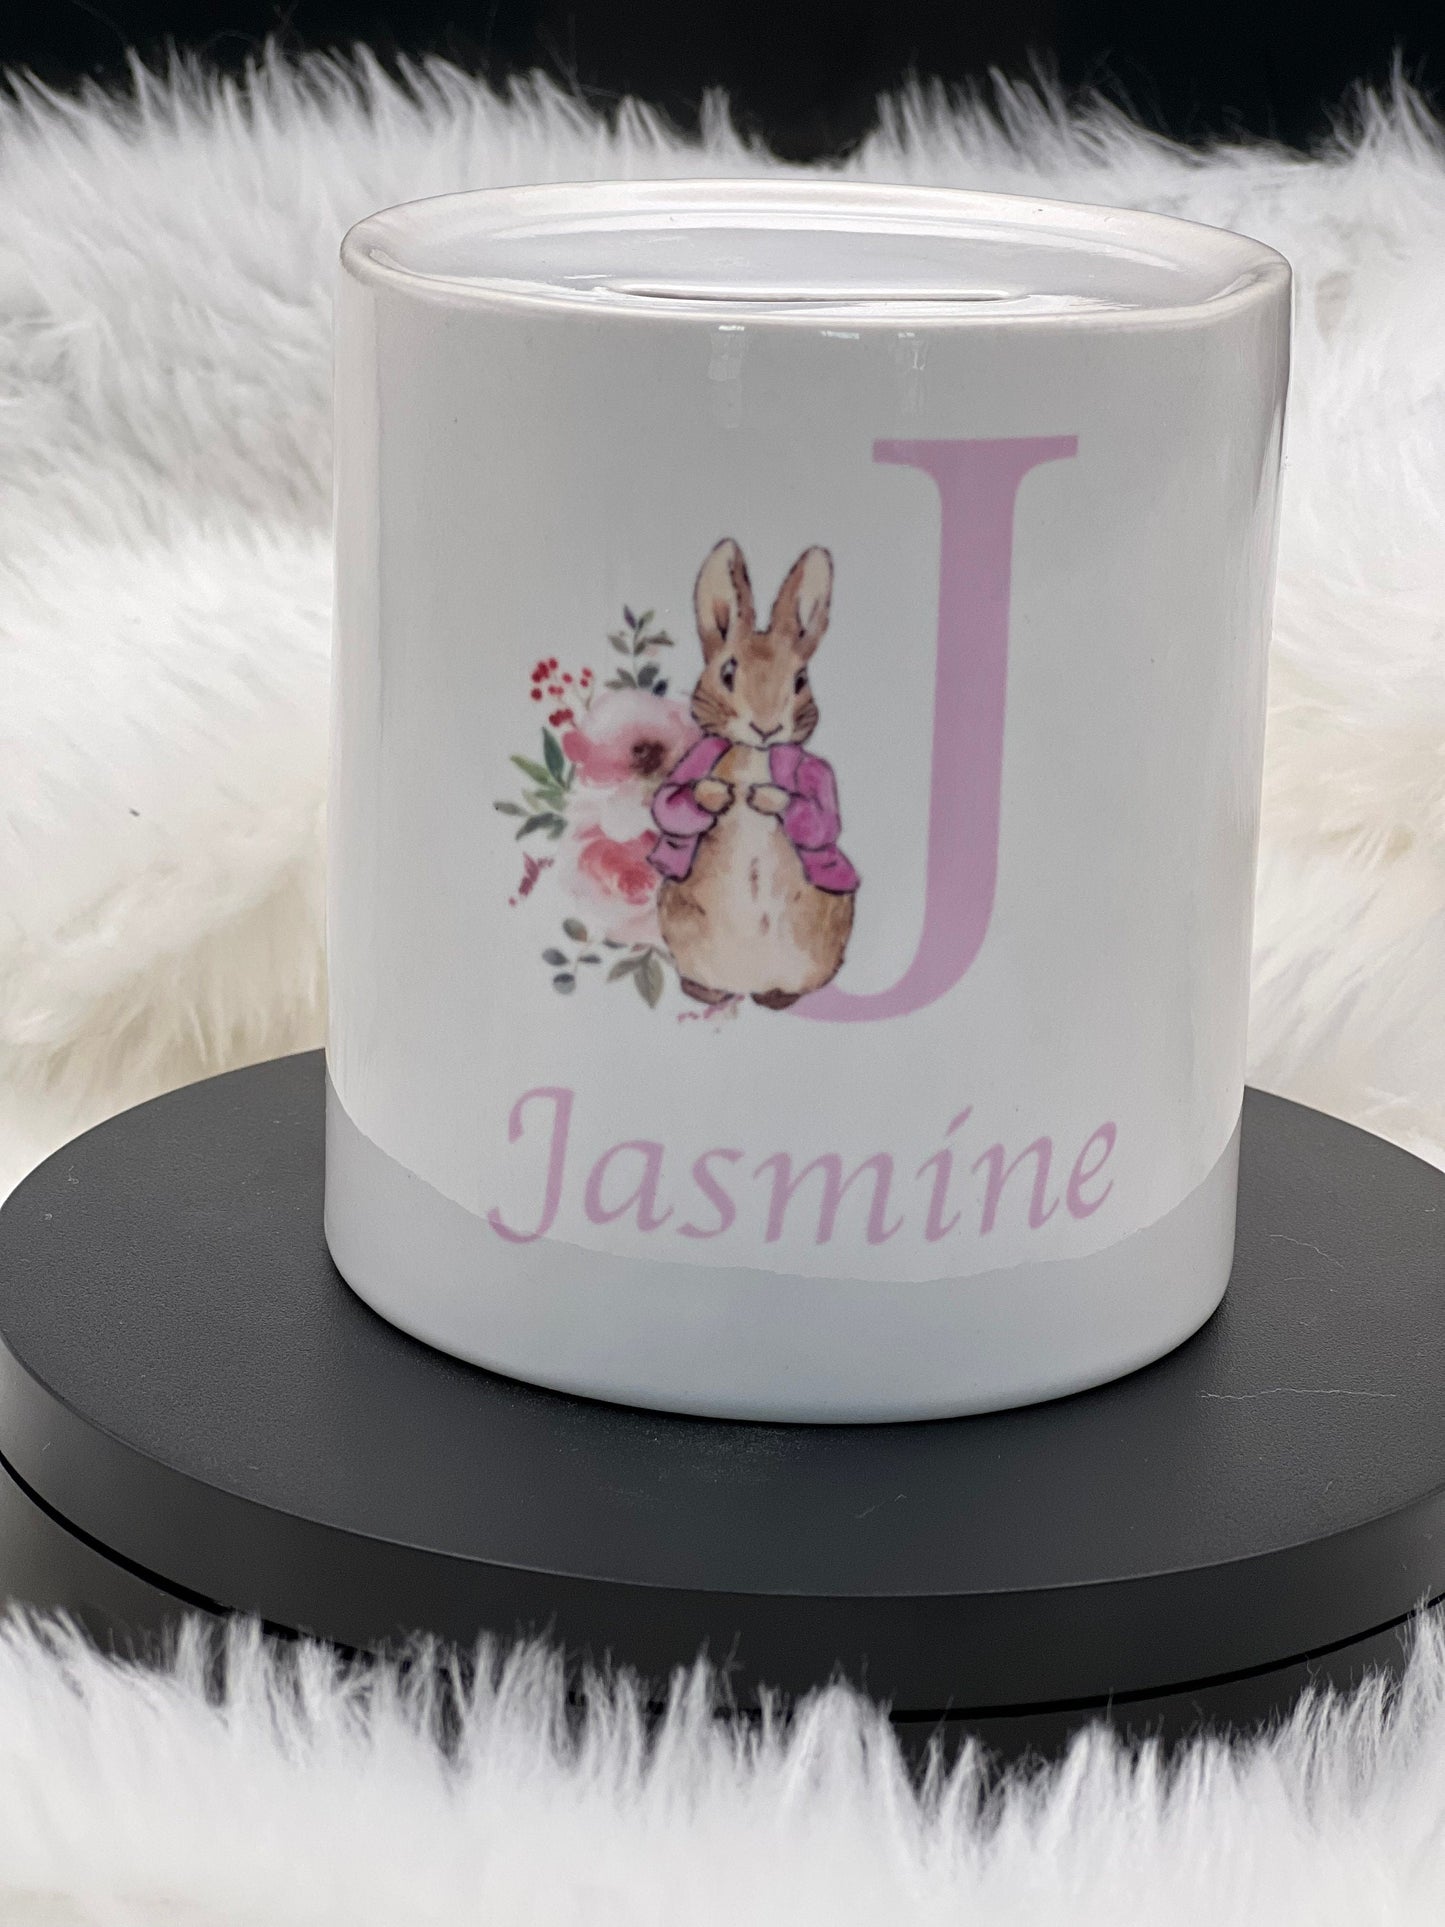 Beautiful Personalised Girl Flopsy Bunny Money Box. Christening Gift. Present For Baby Girl. Hand Made.Personlised Teddy. Two Gifts.